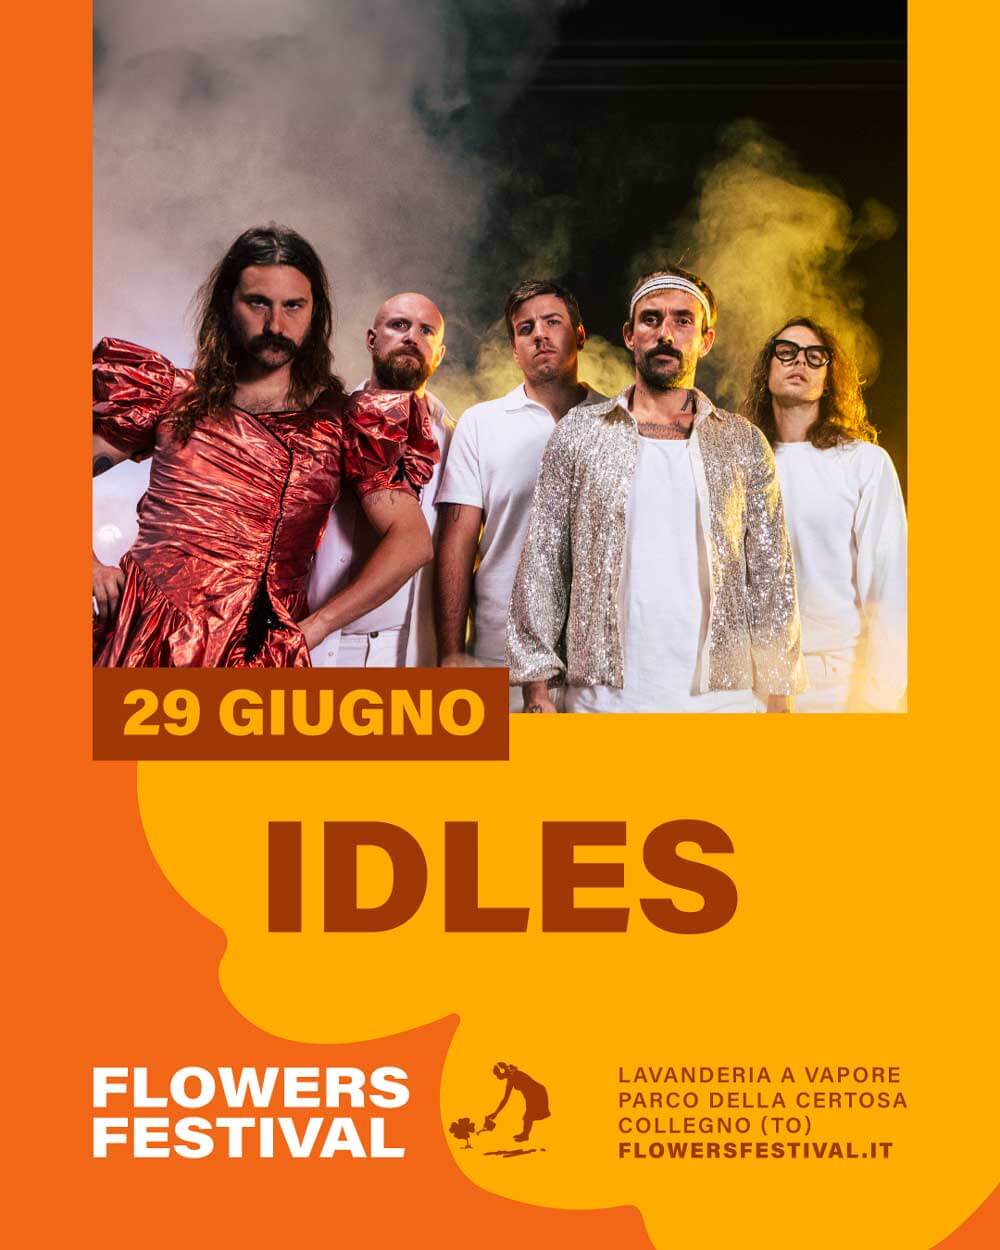 Flowers Festival, Turin, Italy tour poster